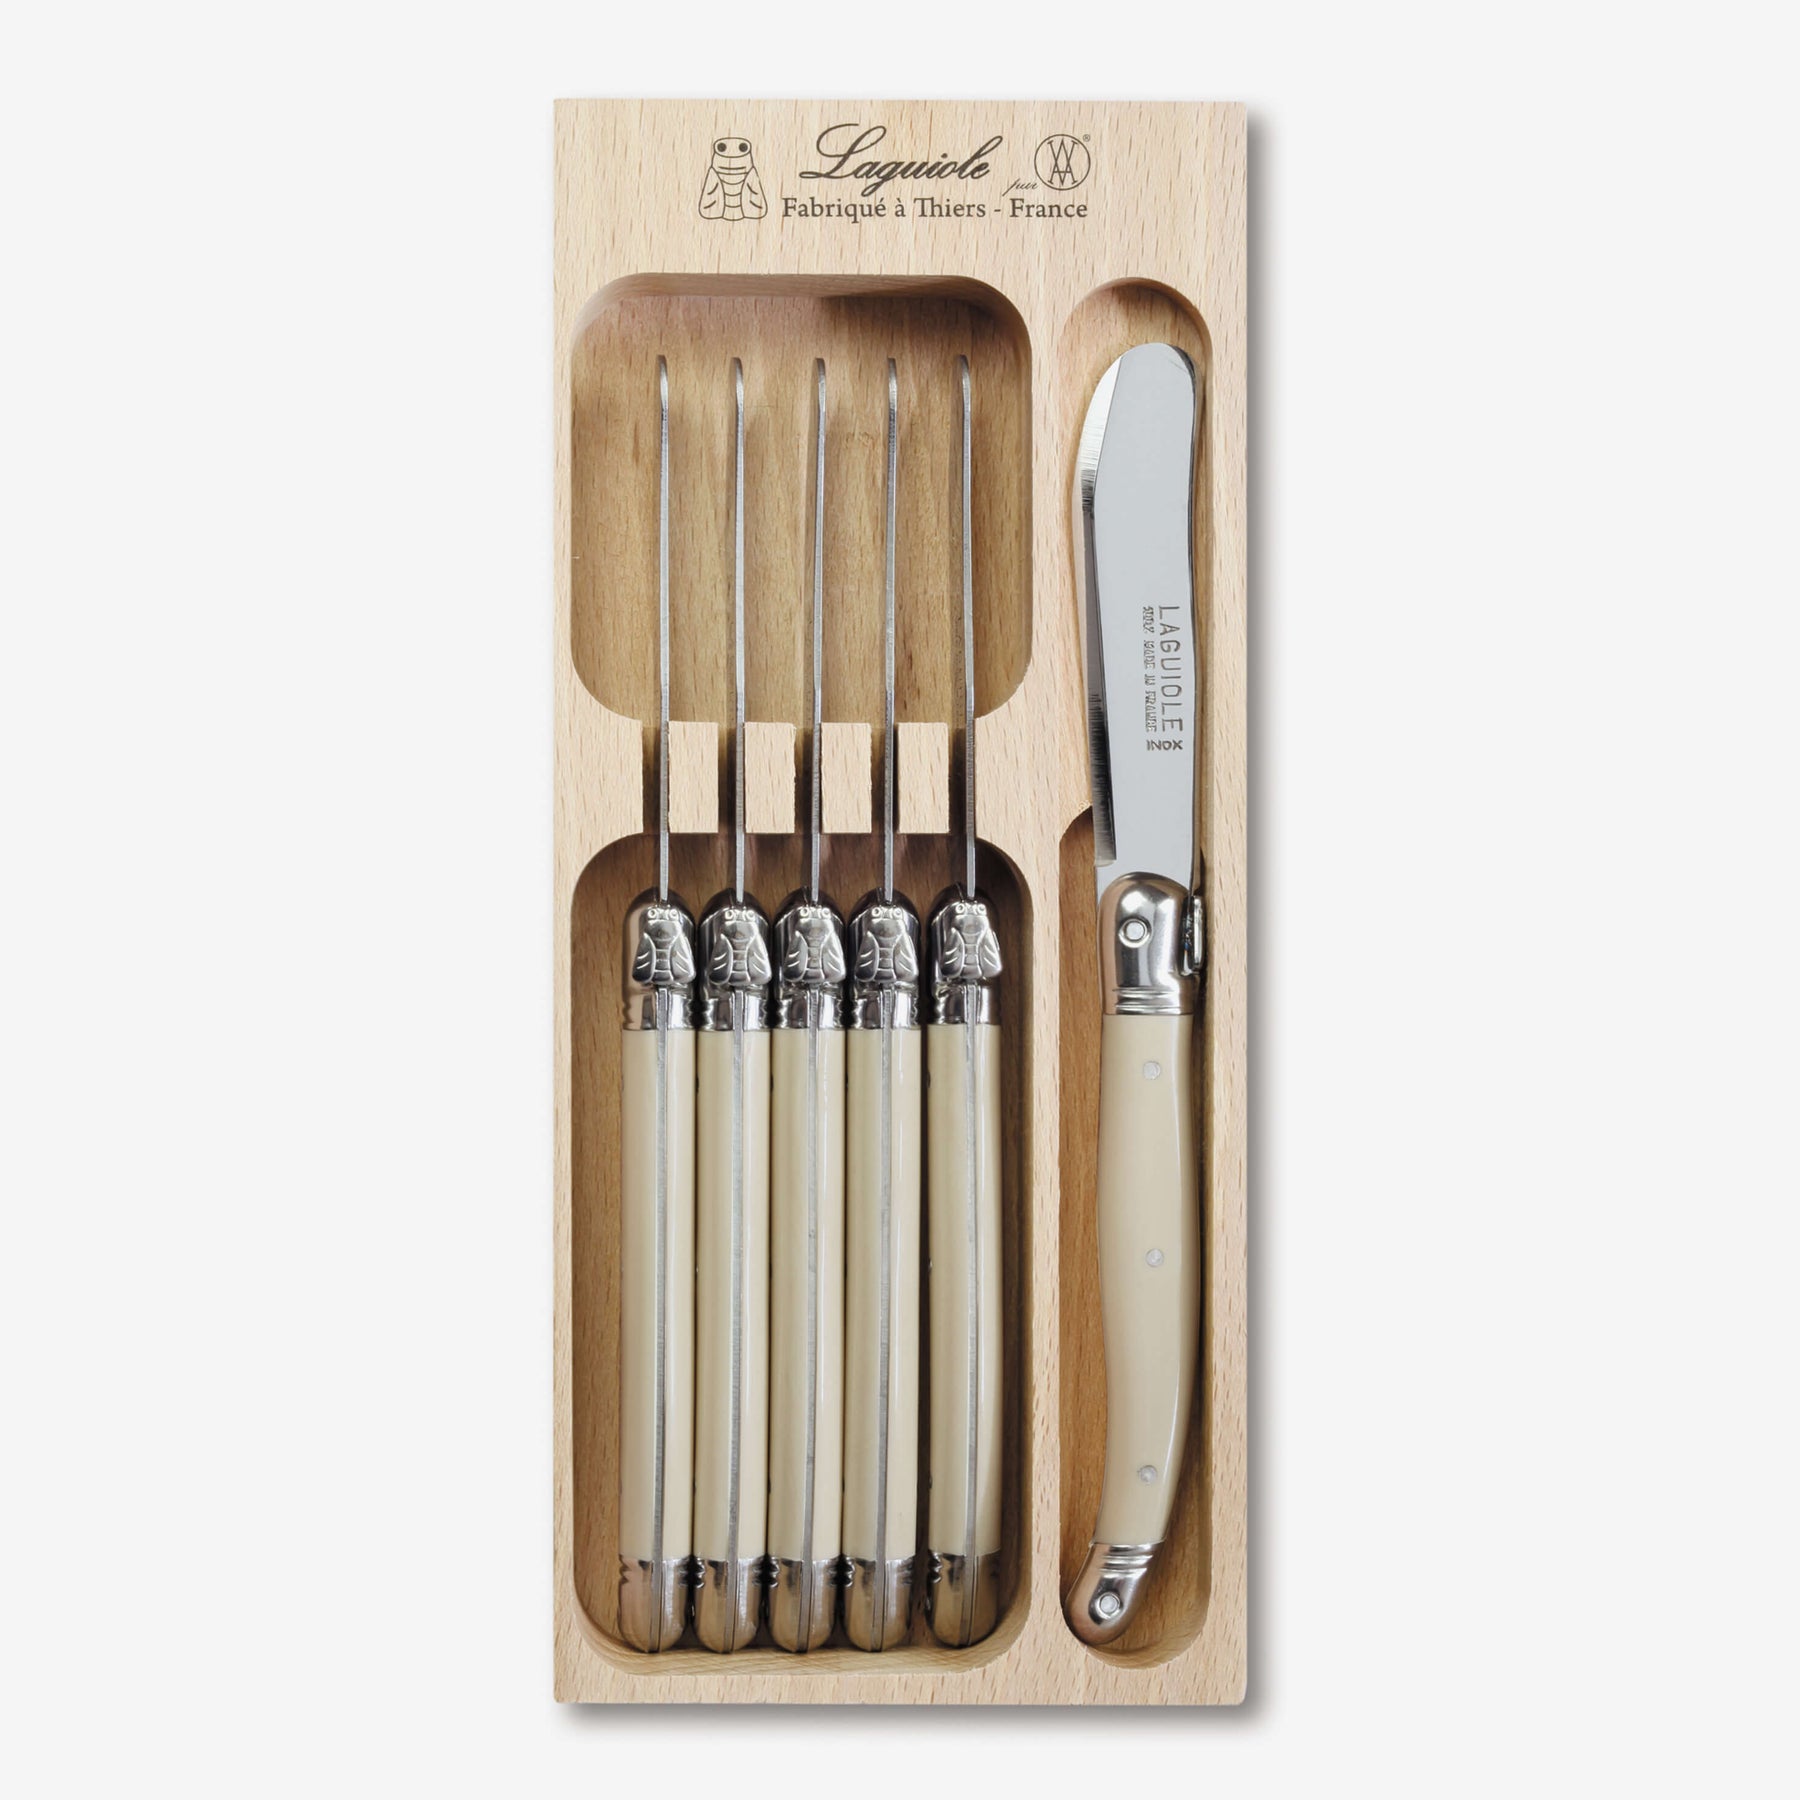 6 Piece Butter Knife Set in Wooden Tray